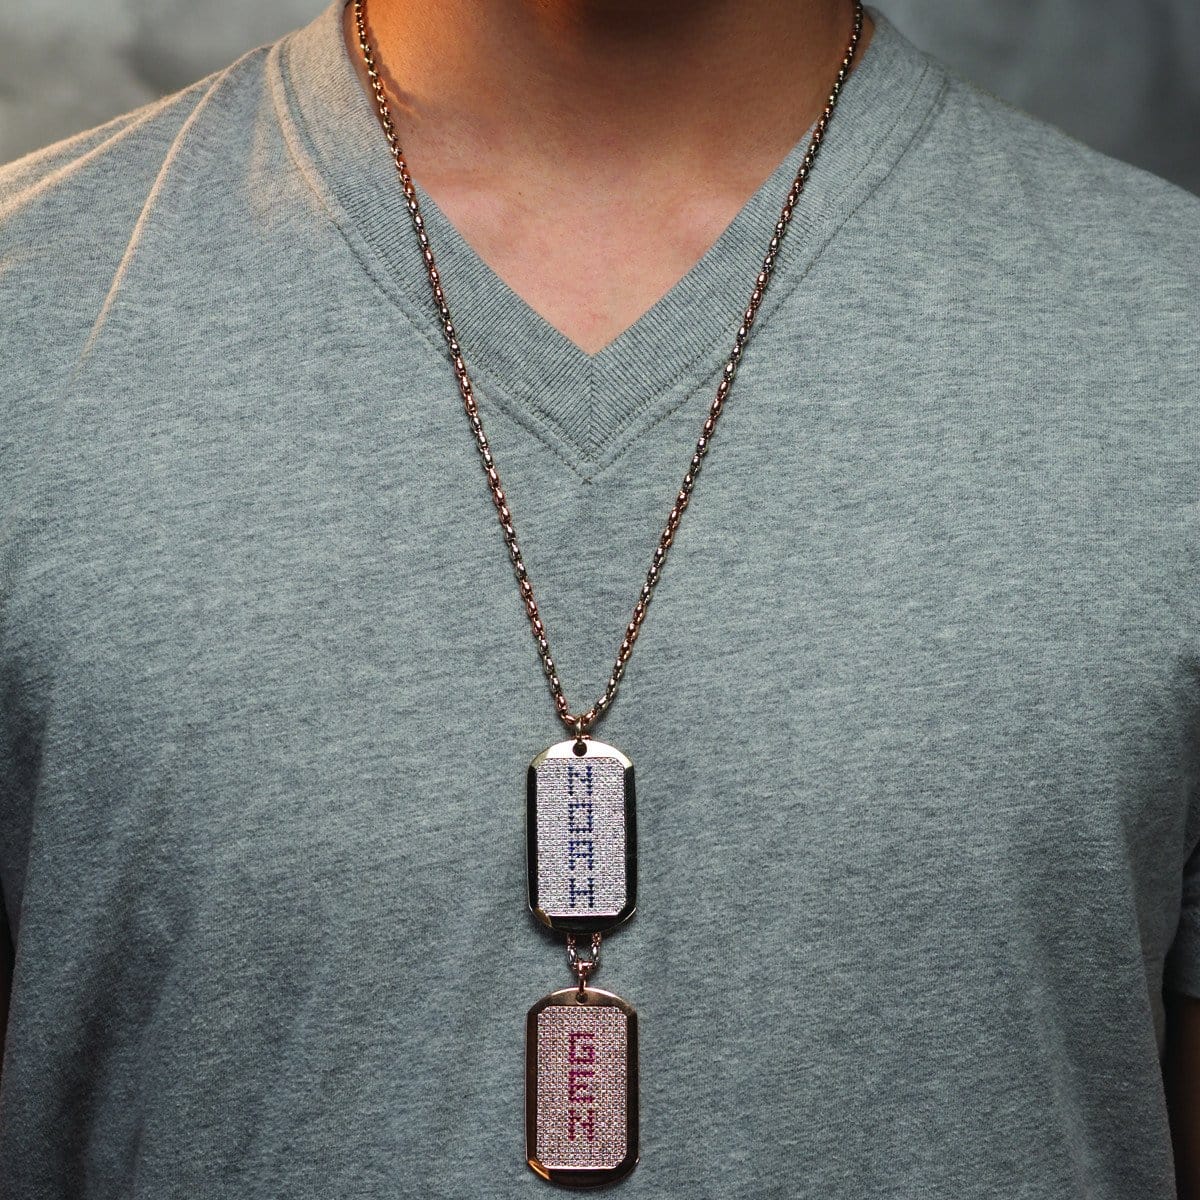 CHRIS AIRE GOLD AND  DIAMOND DOG TAGS - Chris Aire Fine Jewelry & Timepieces